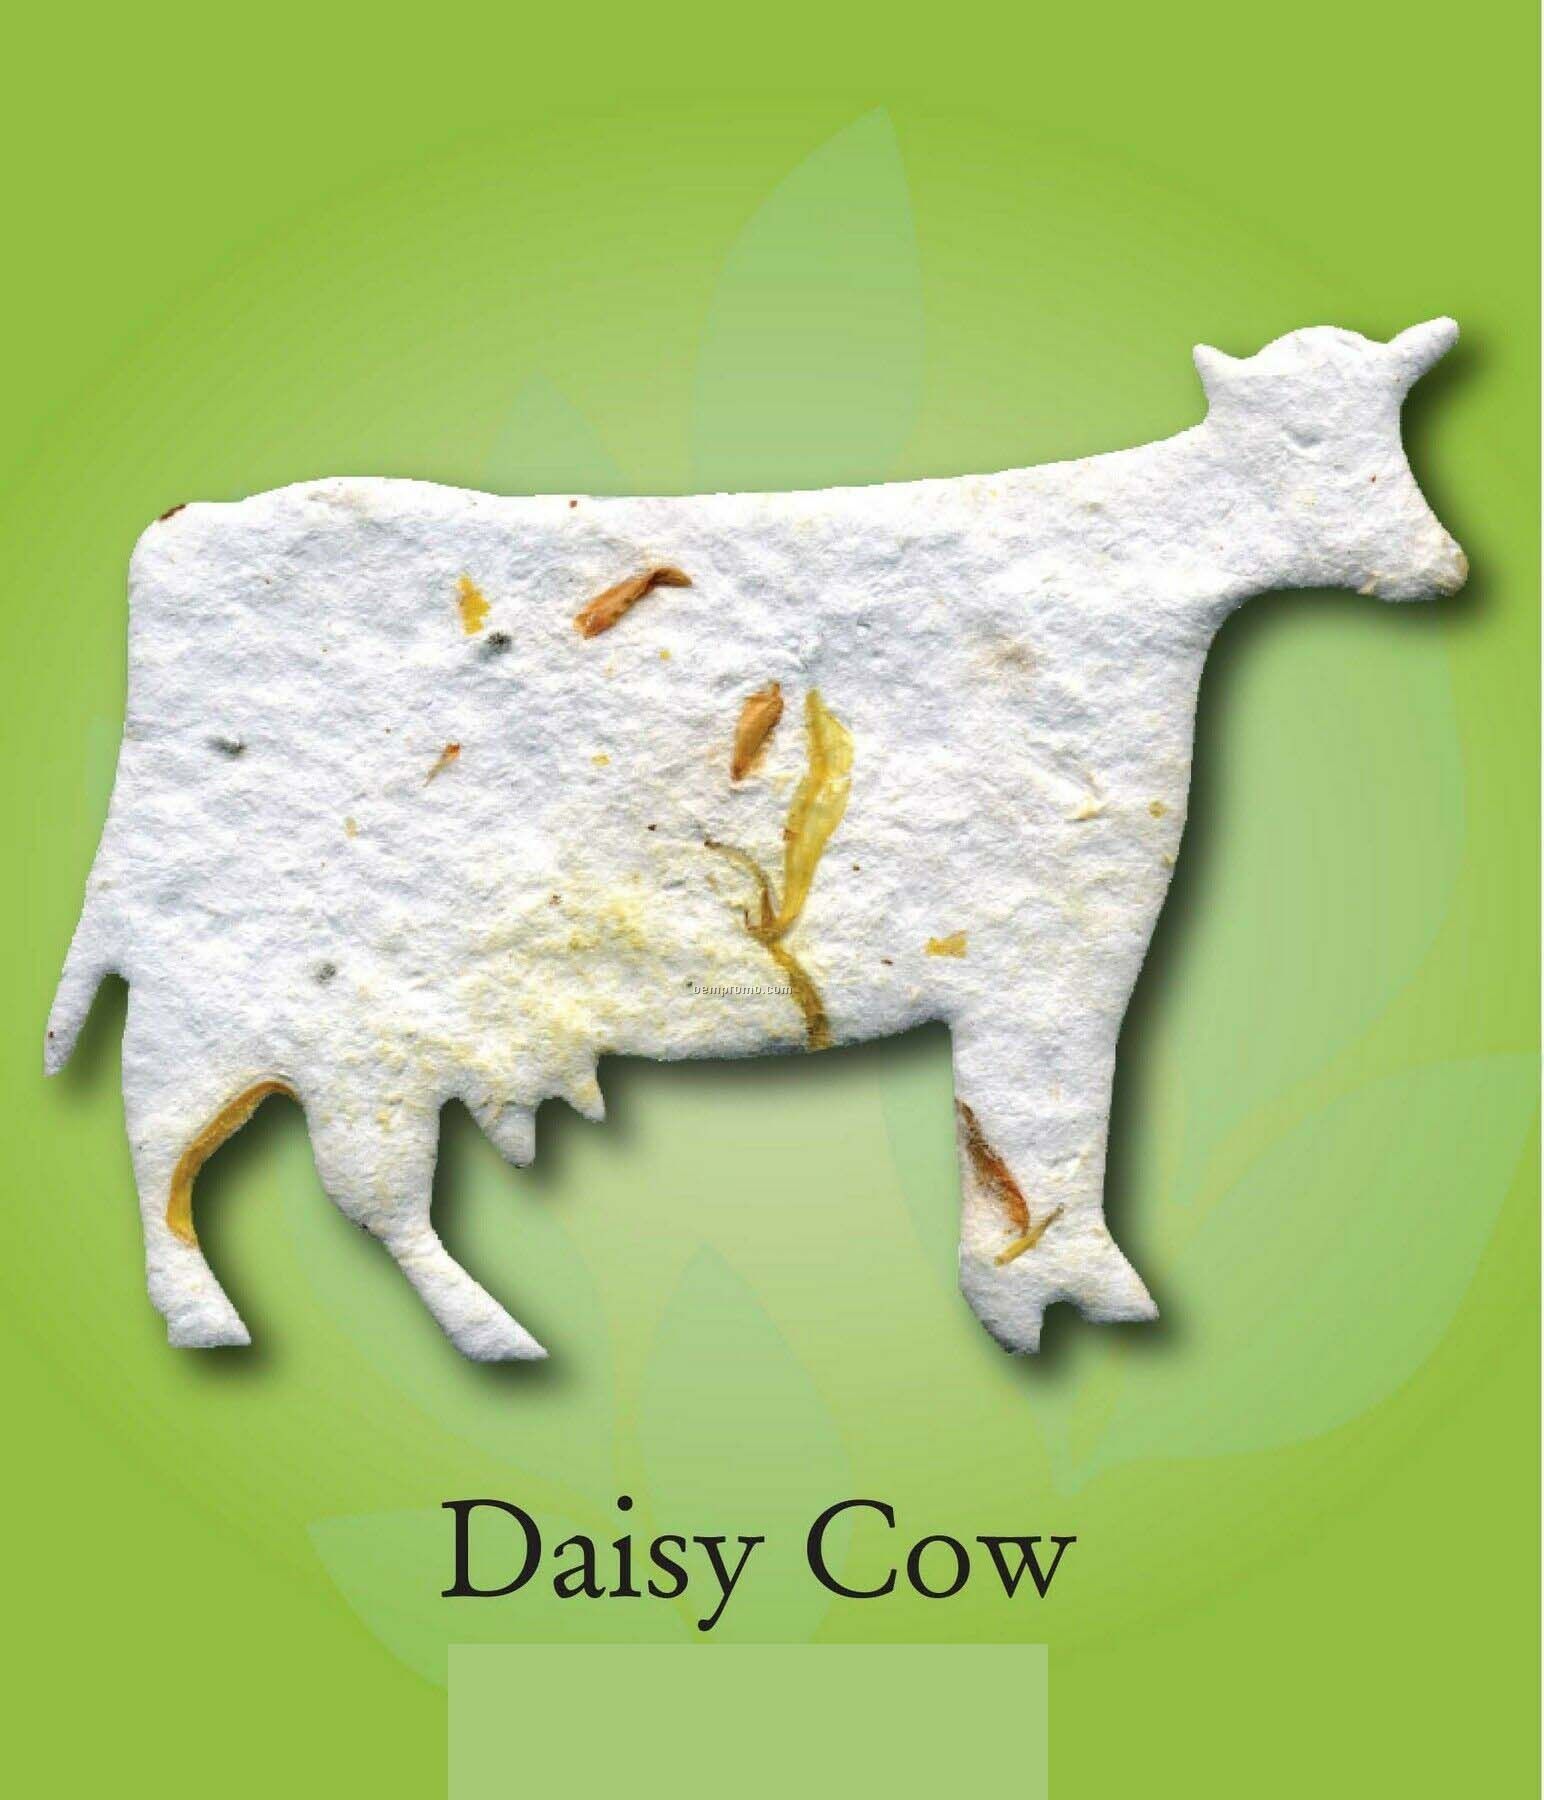 Daisy Cow Ornament With Embedded Seed